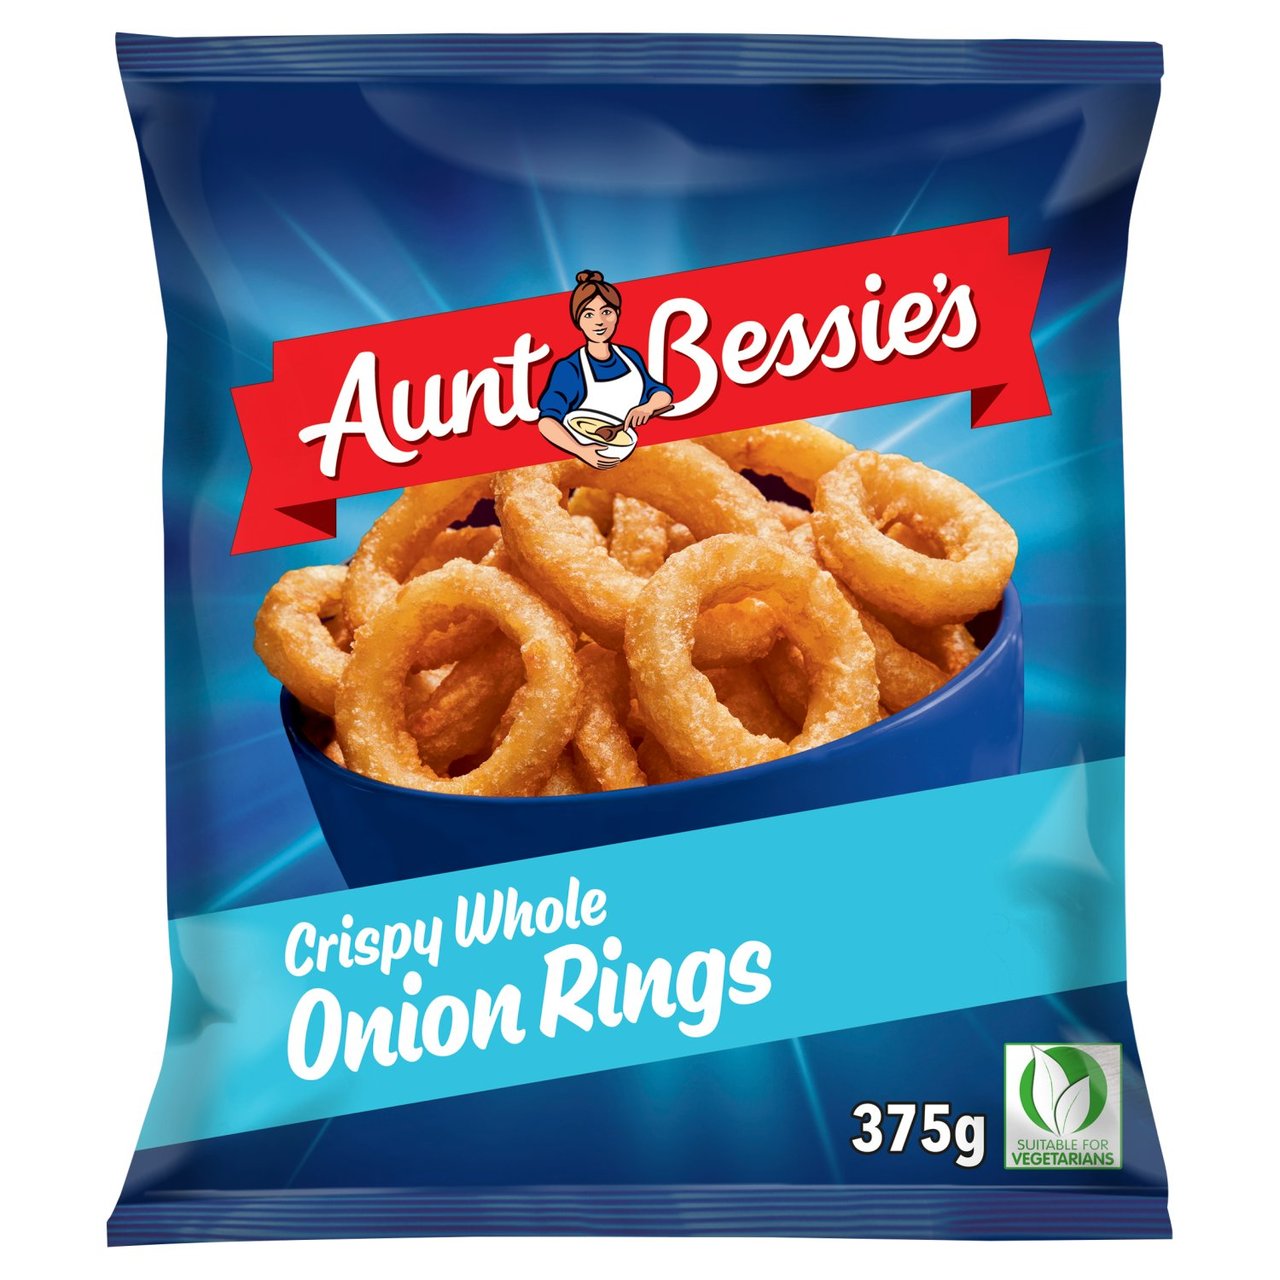 Morrisons Onion Rings (125g) - Compare Prices & Where To Buy - Trolley.co.uk